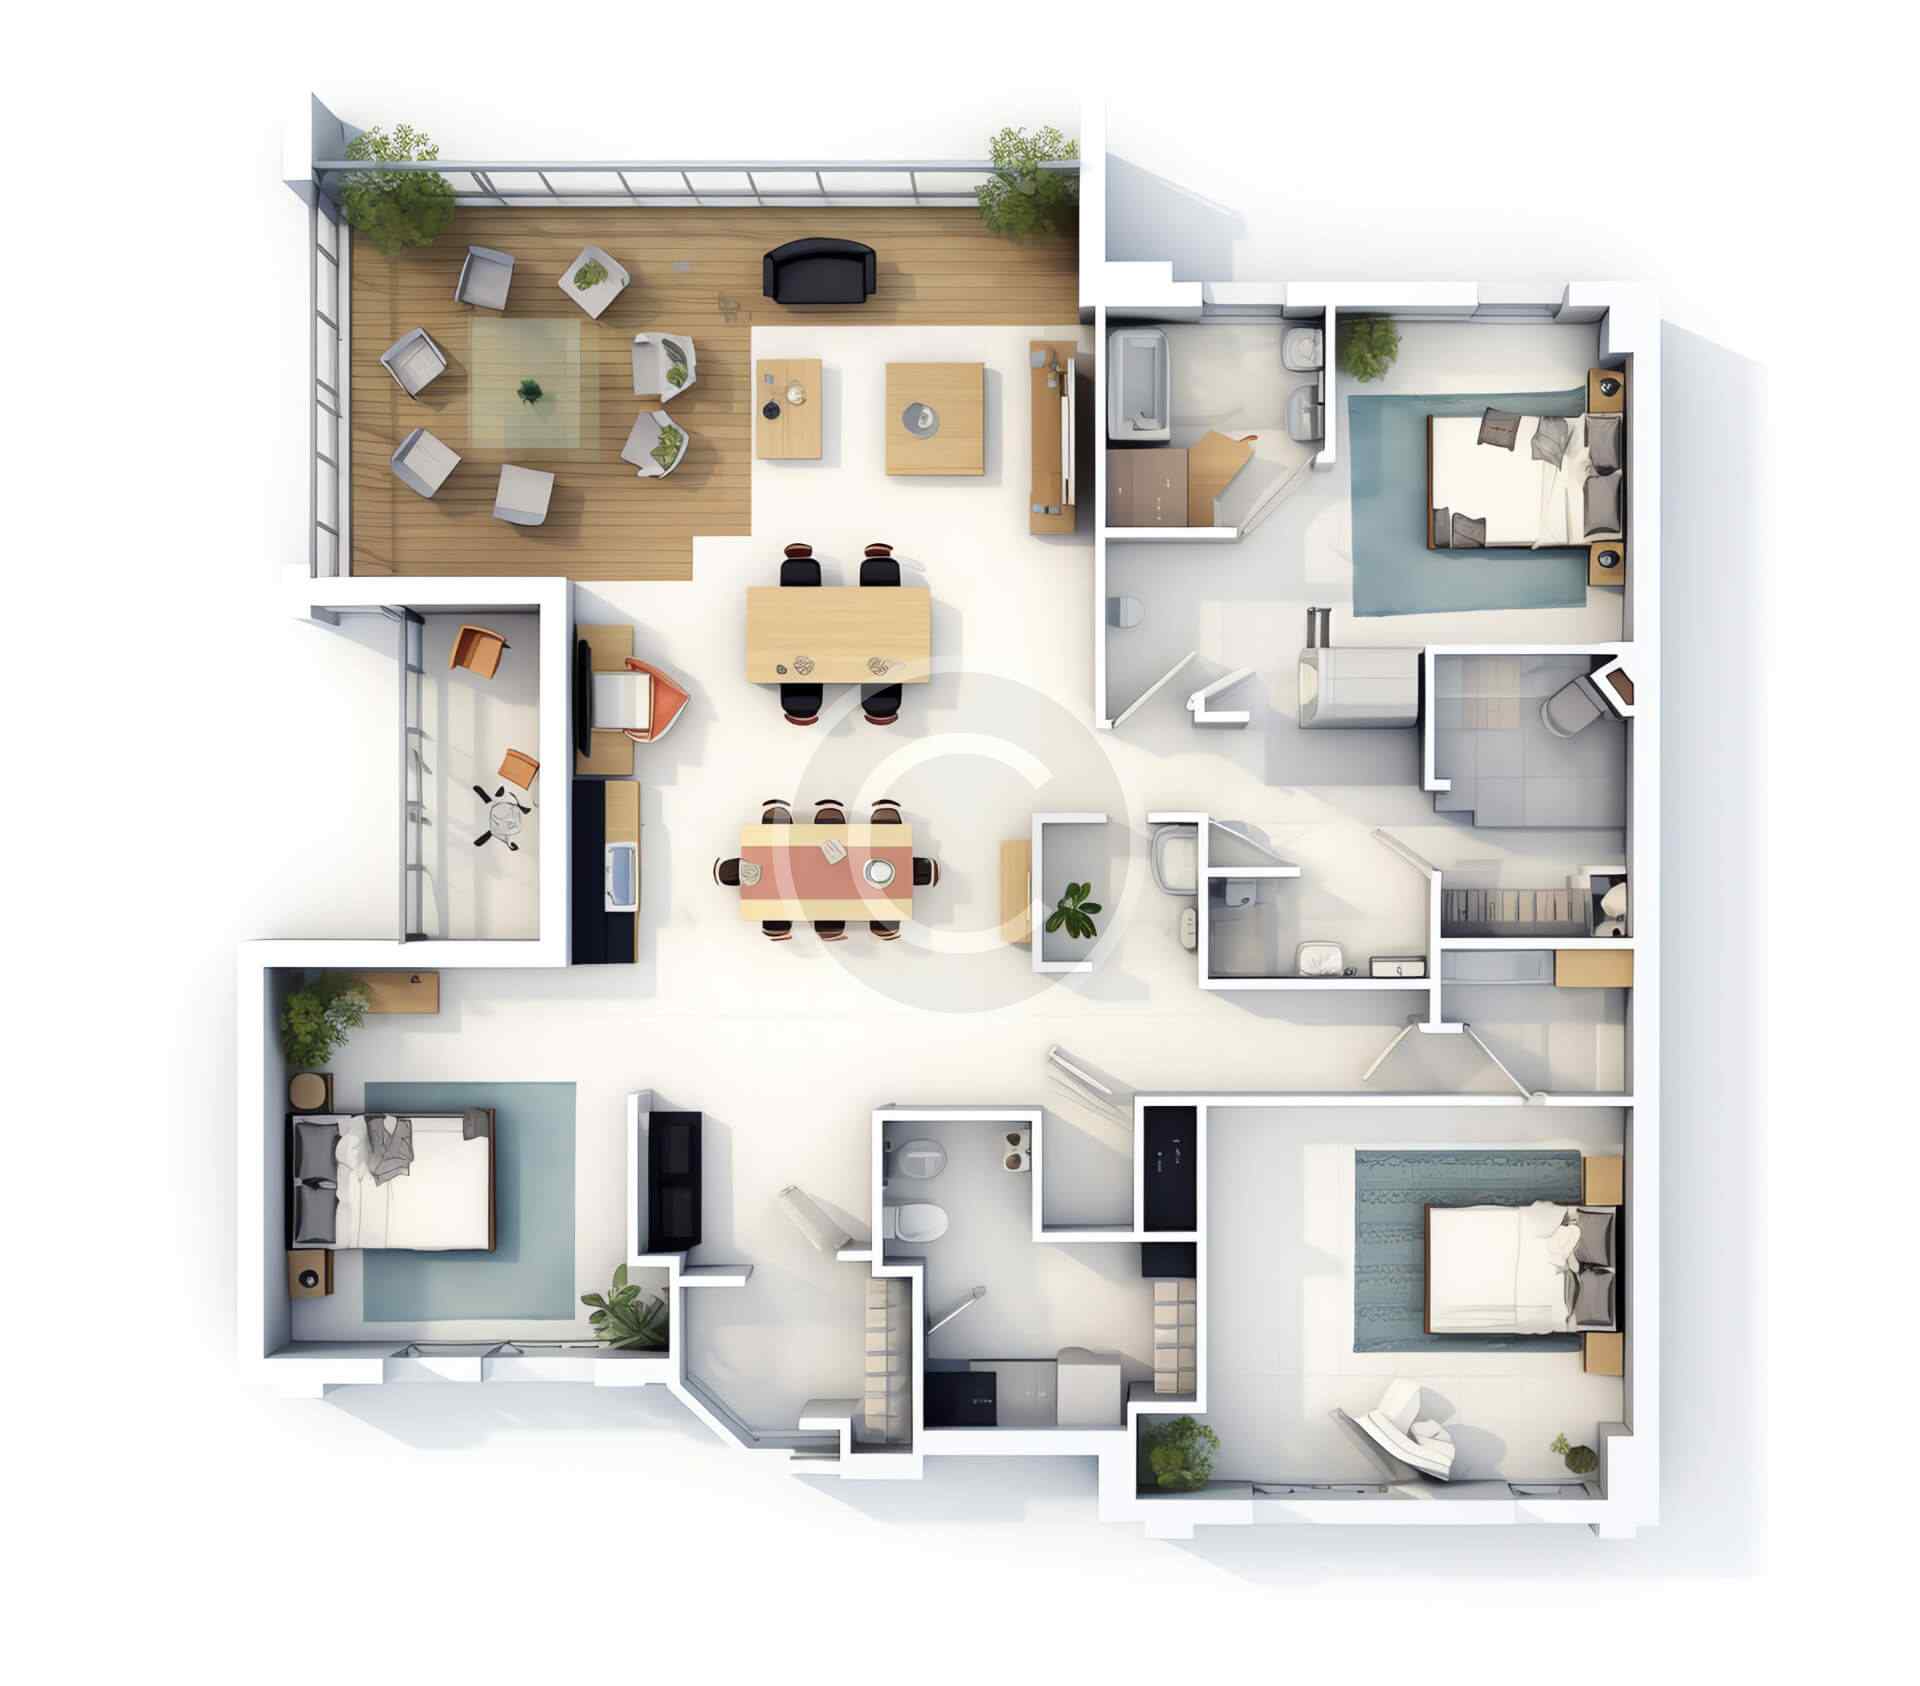 Typical house layout